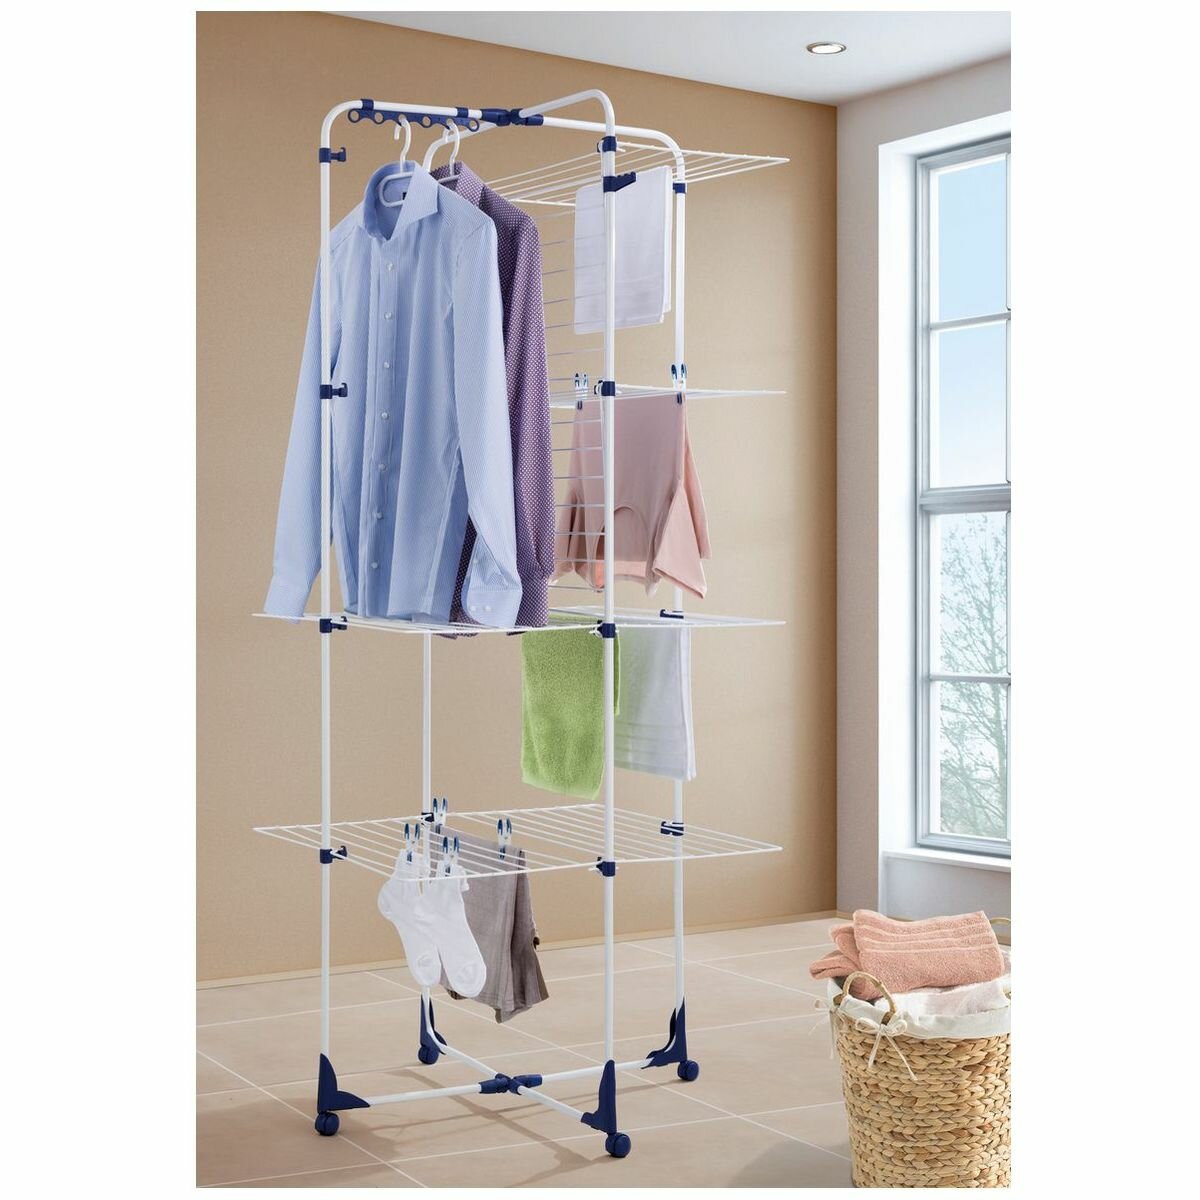 LEIFHEIT COMFORT 420 TOWER FREE STANDING CLOTHES LAUNDRY DRYER RACK 42M 